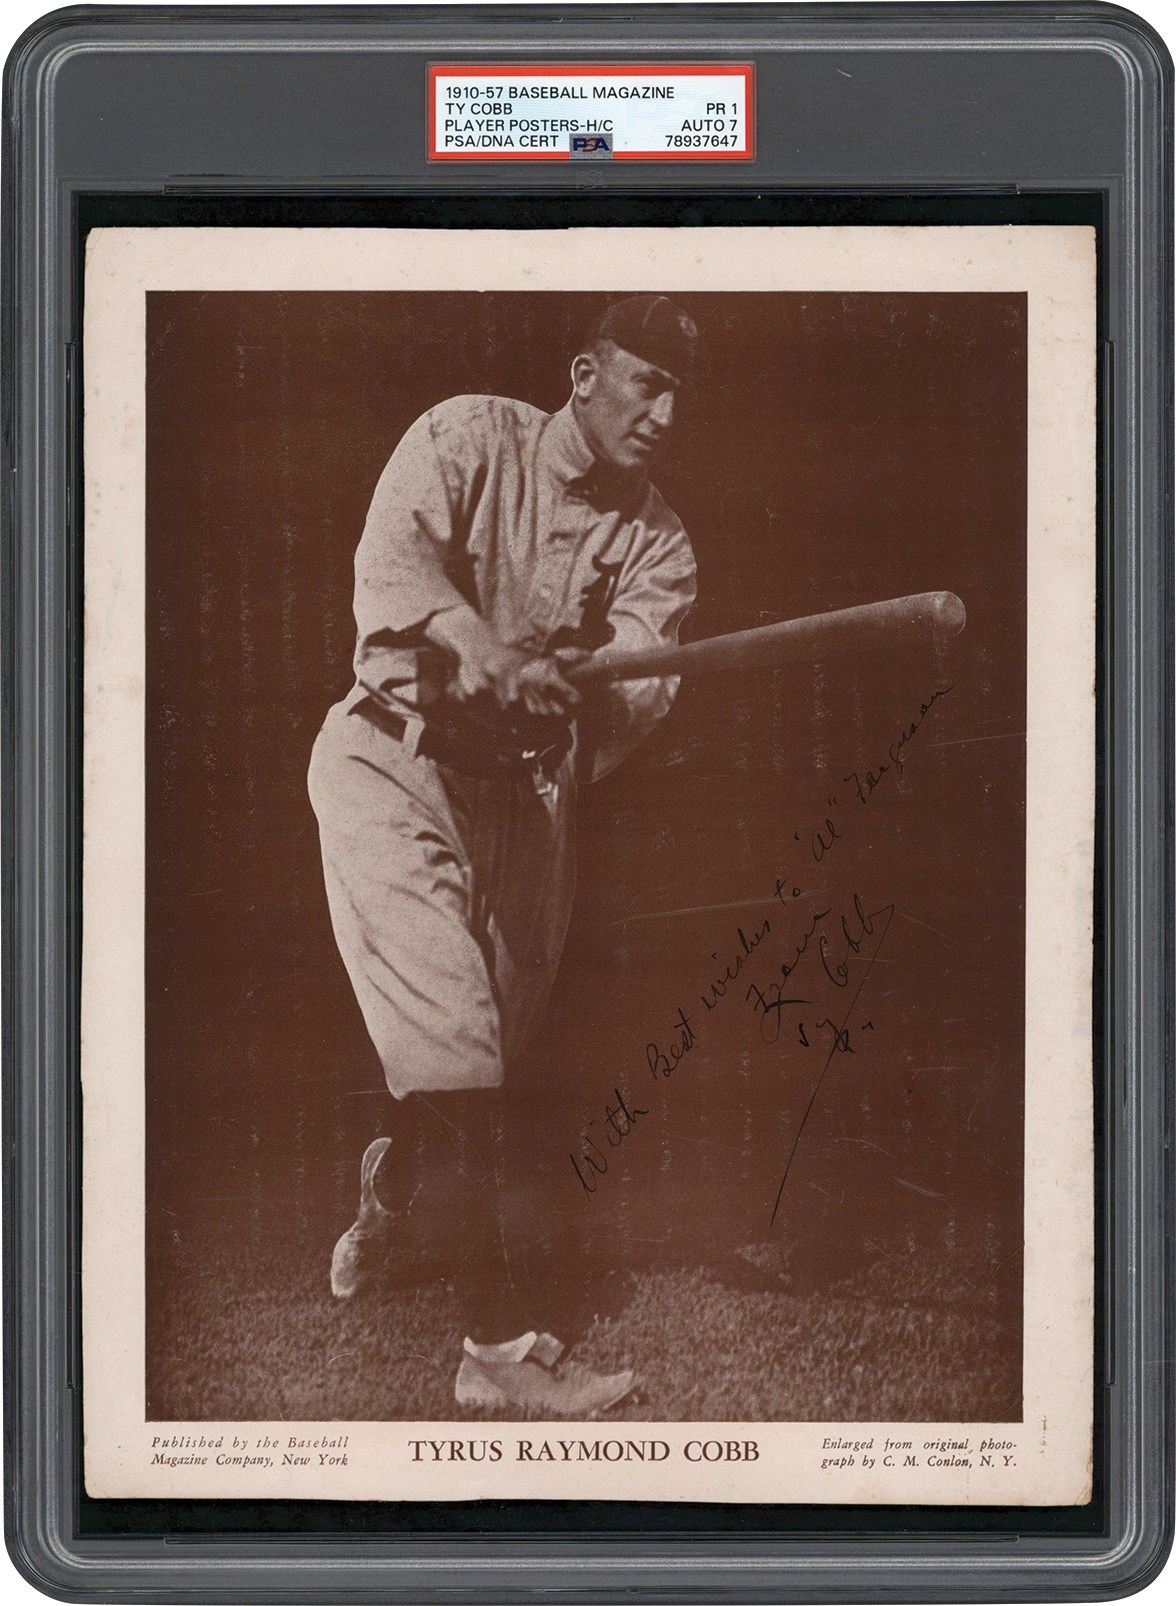 - 1910-1957 M114 Baseball Magazine Player Posters Signed Ty Cobb PSA PR 1 Auto 7 (Only Known Example)